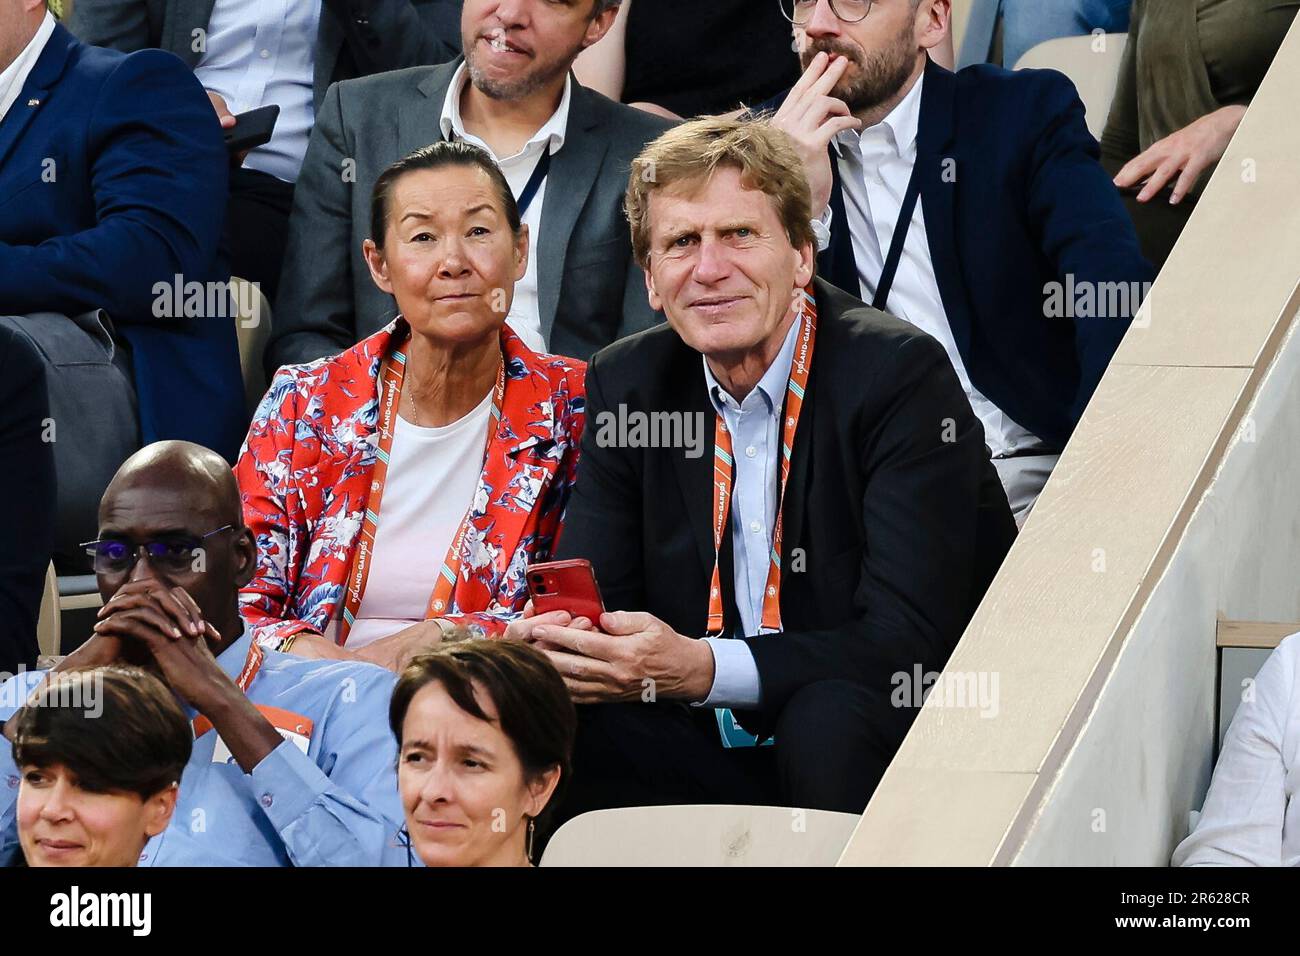 Paris, France. 6th June, 2023. Dietloff von Arnim (r) sits in the stands. The President of the German Tennis Federation (DTB) is standing in the election for the presidency of the International Tennis Federation (ITF) on 24 September 2023. Frank Molter/Alamy Live news Stock Photo